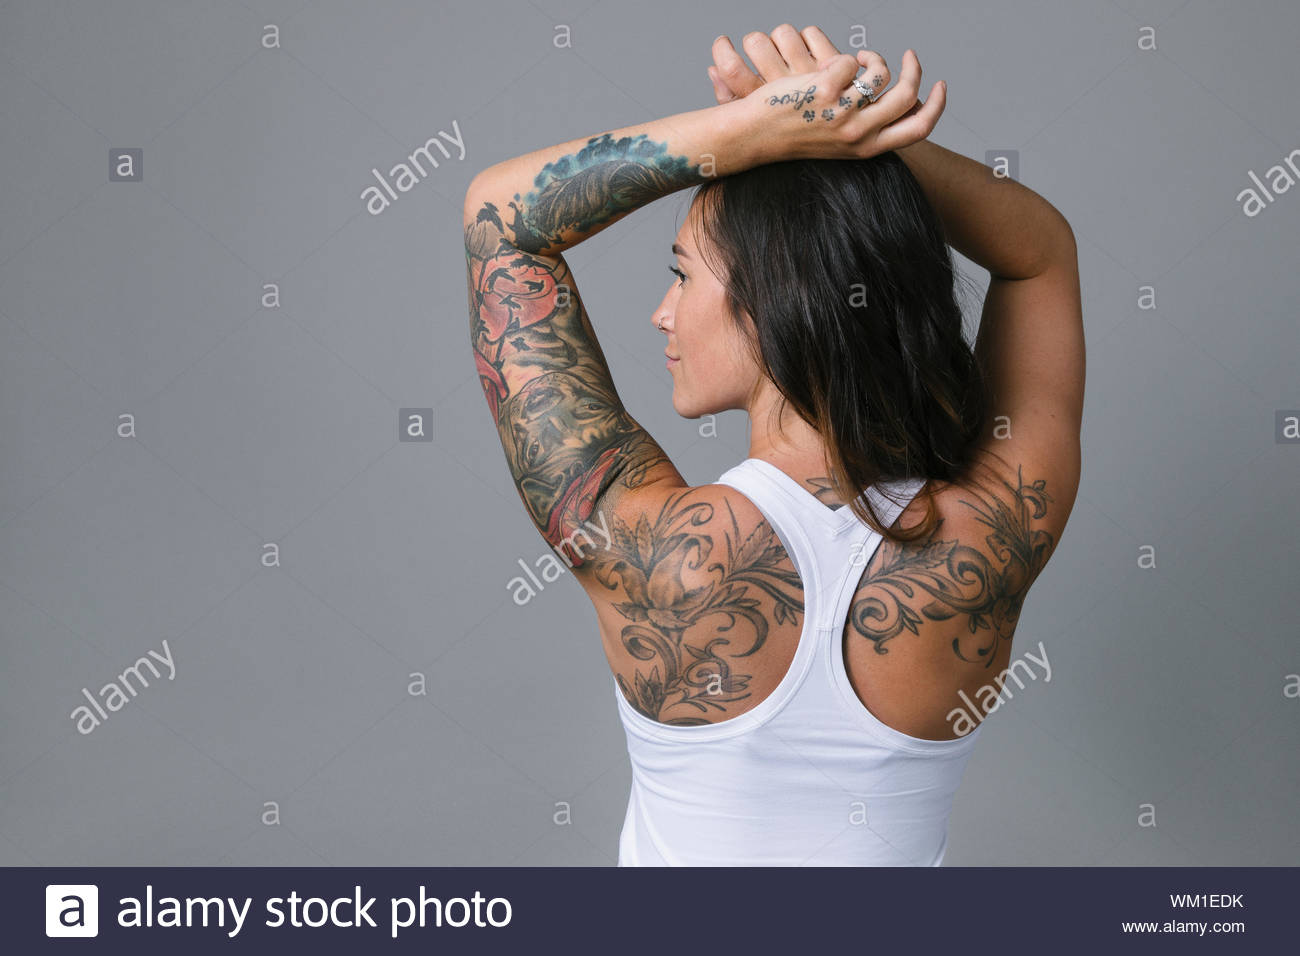 Rear view portrait young woman with tattoos wearing racerback tank top Stock Photo